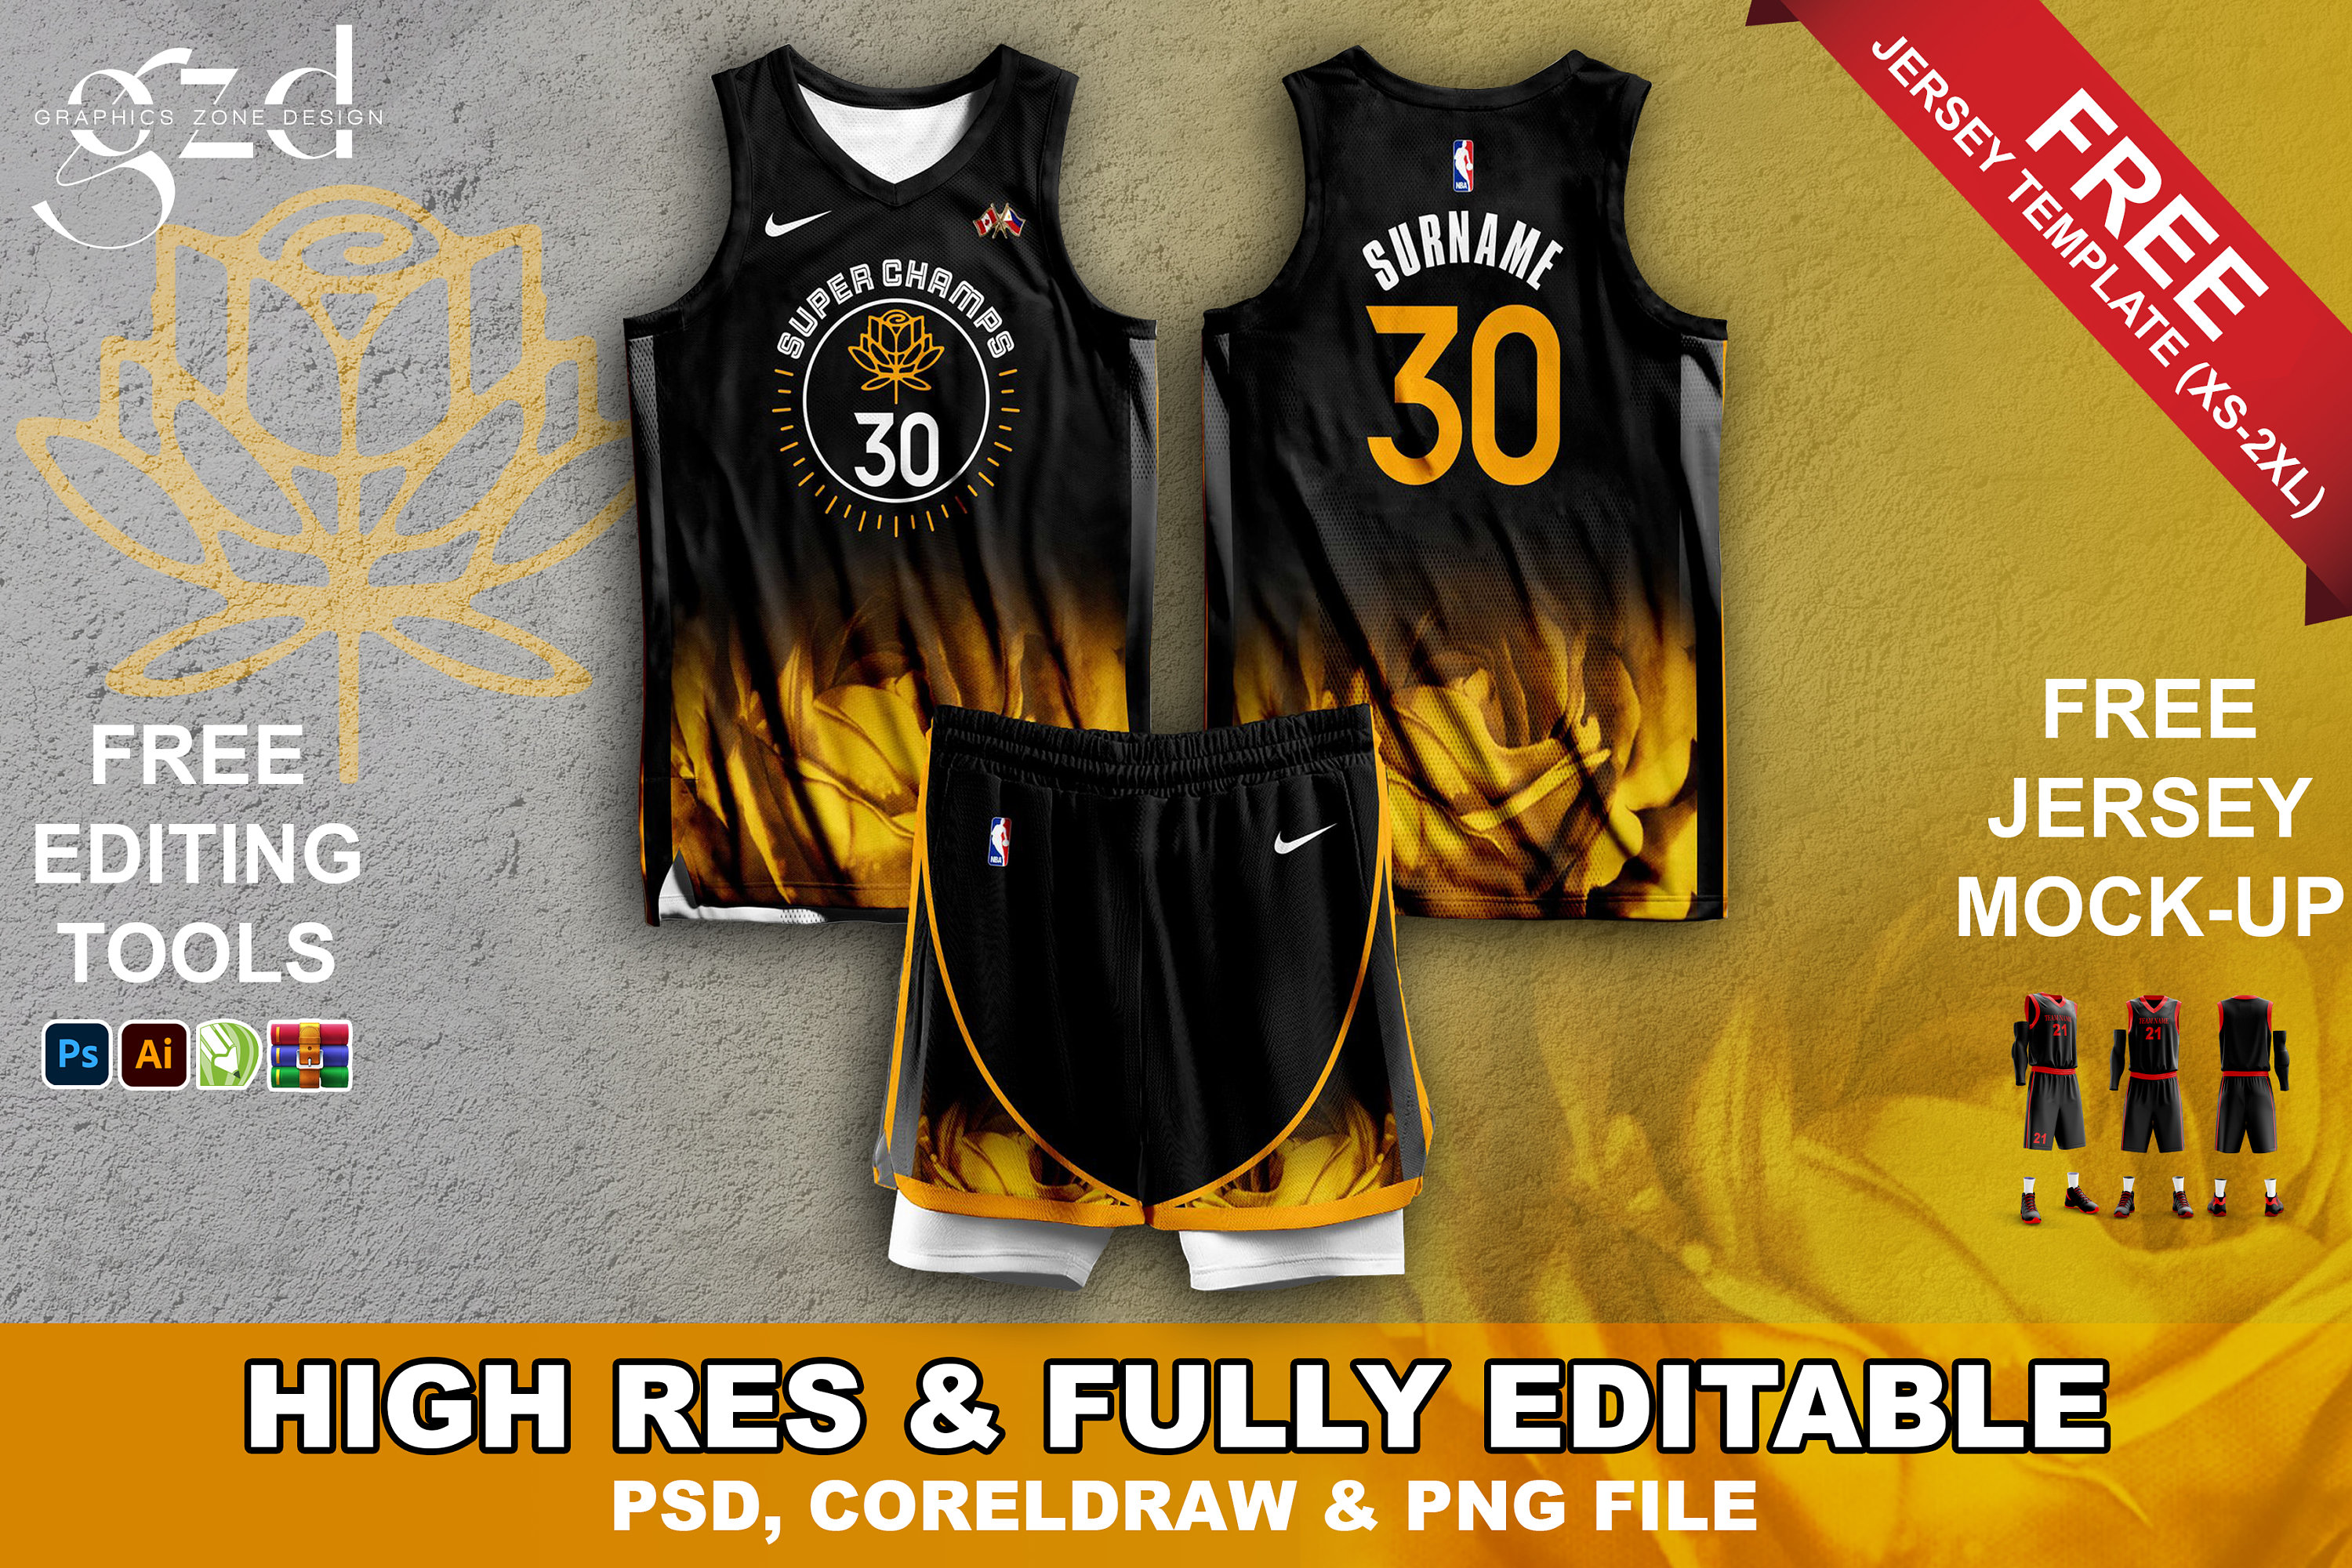 Reversible Practice Jersey with Fast Break on Front & Player Number Front &  Back Included. – Fast Break Youth Basketball